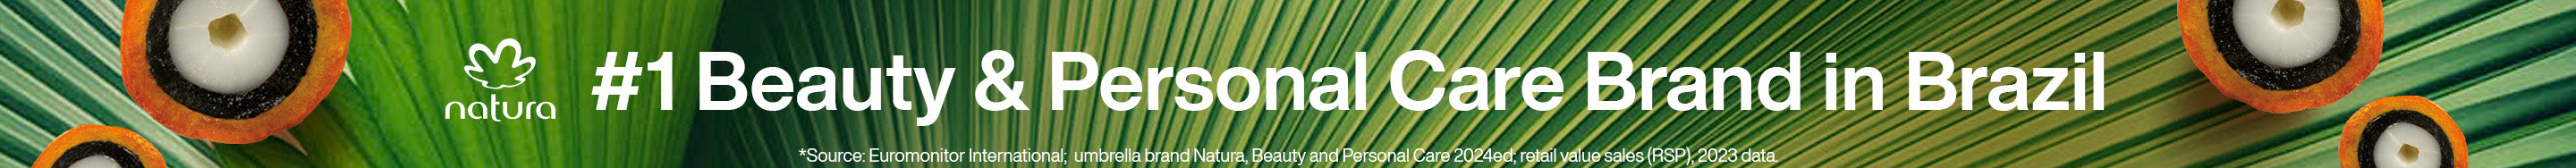 First Beauty & Personal Care Brand in Brazil